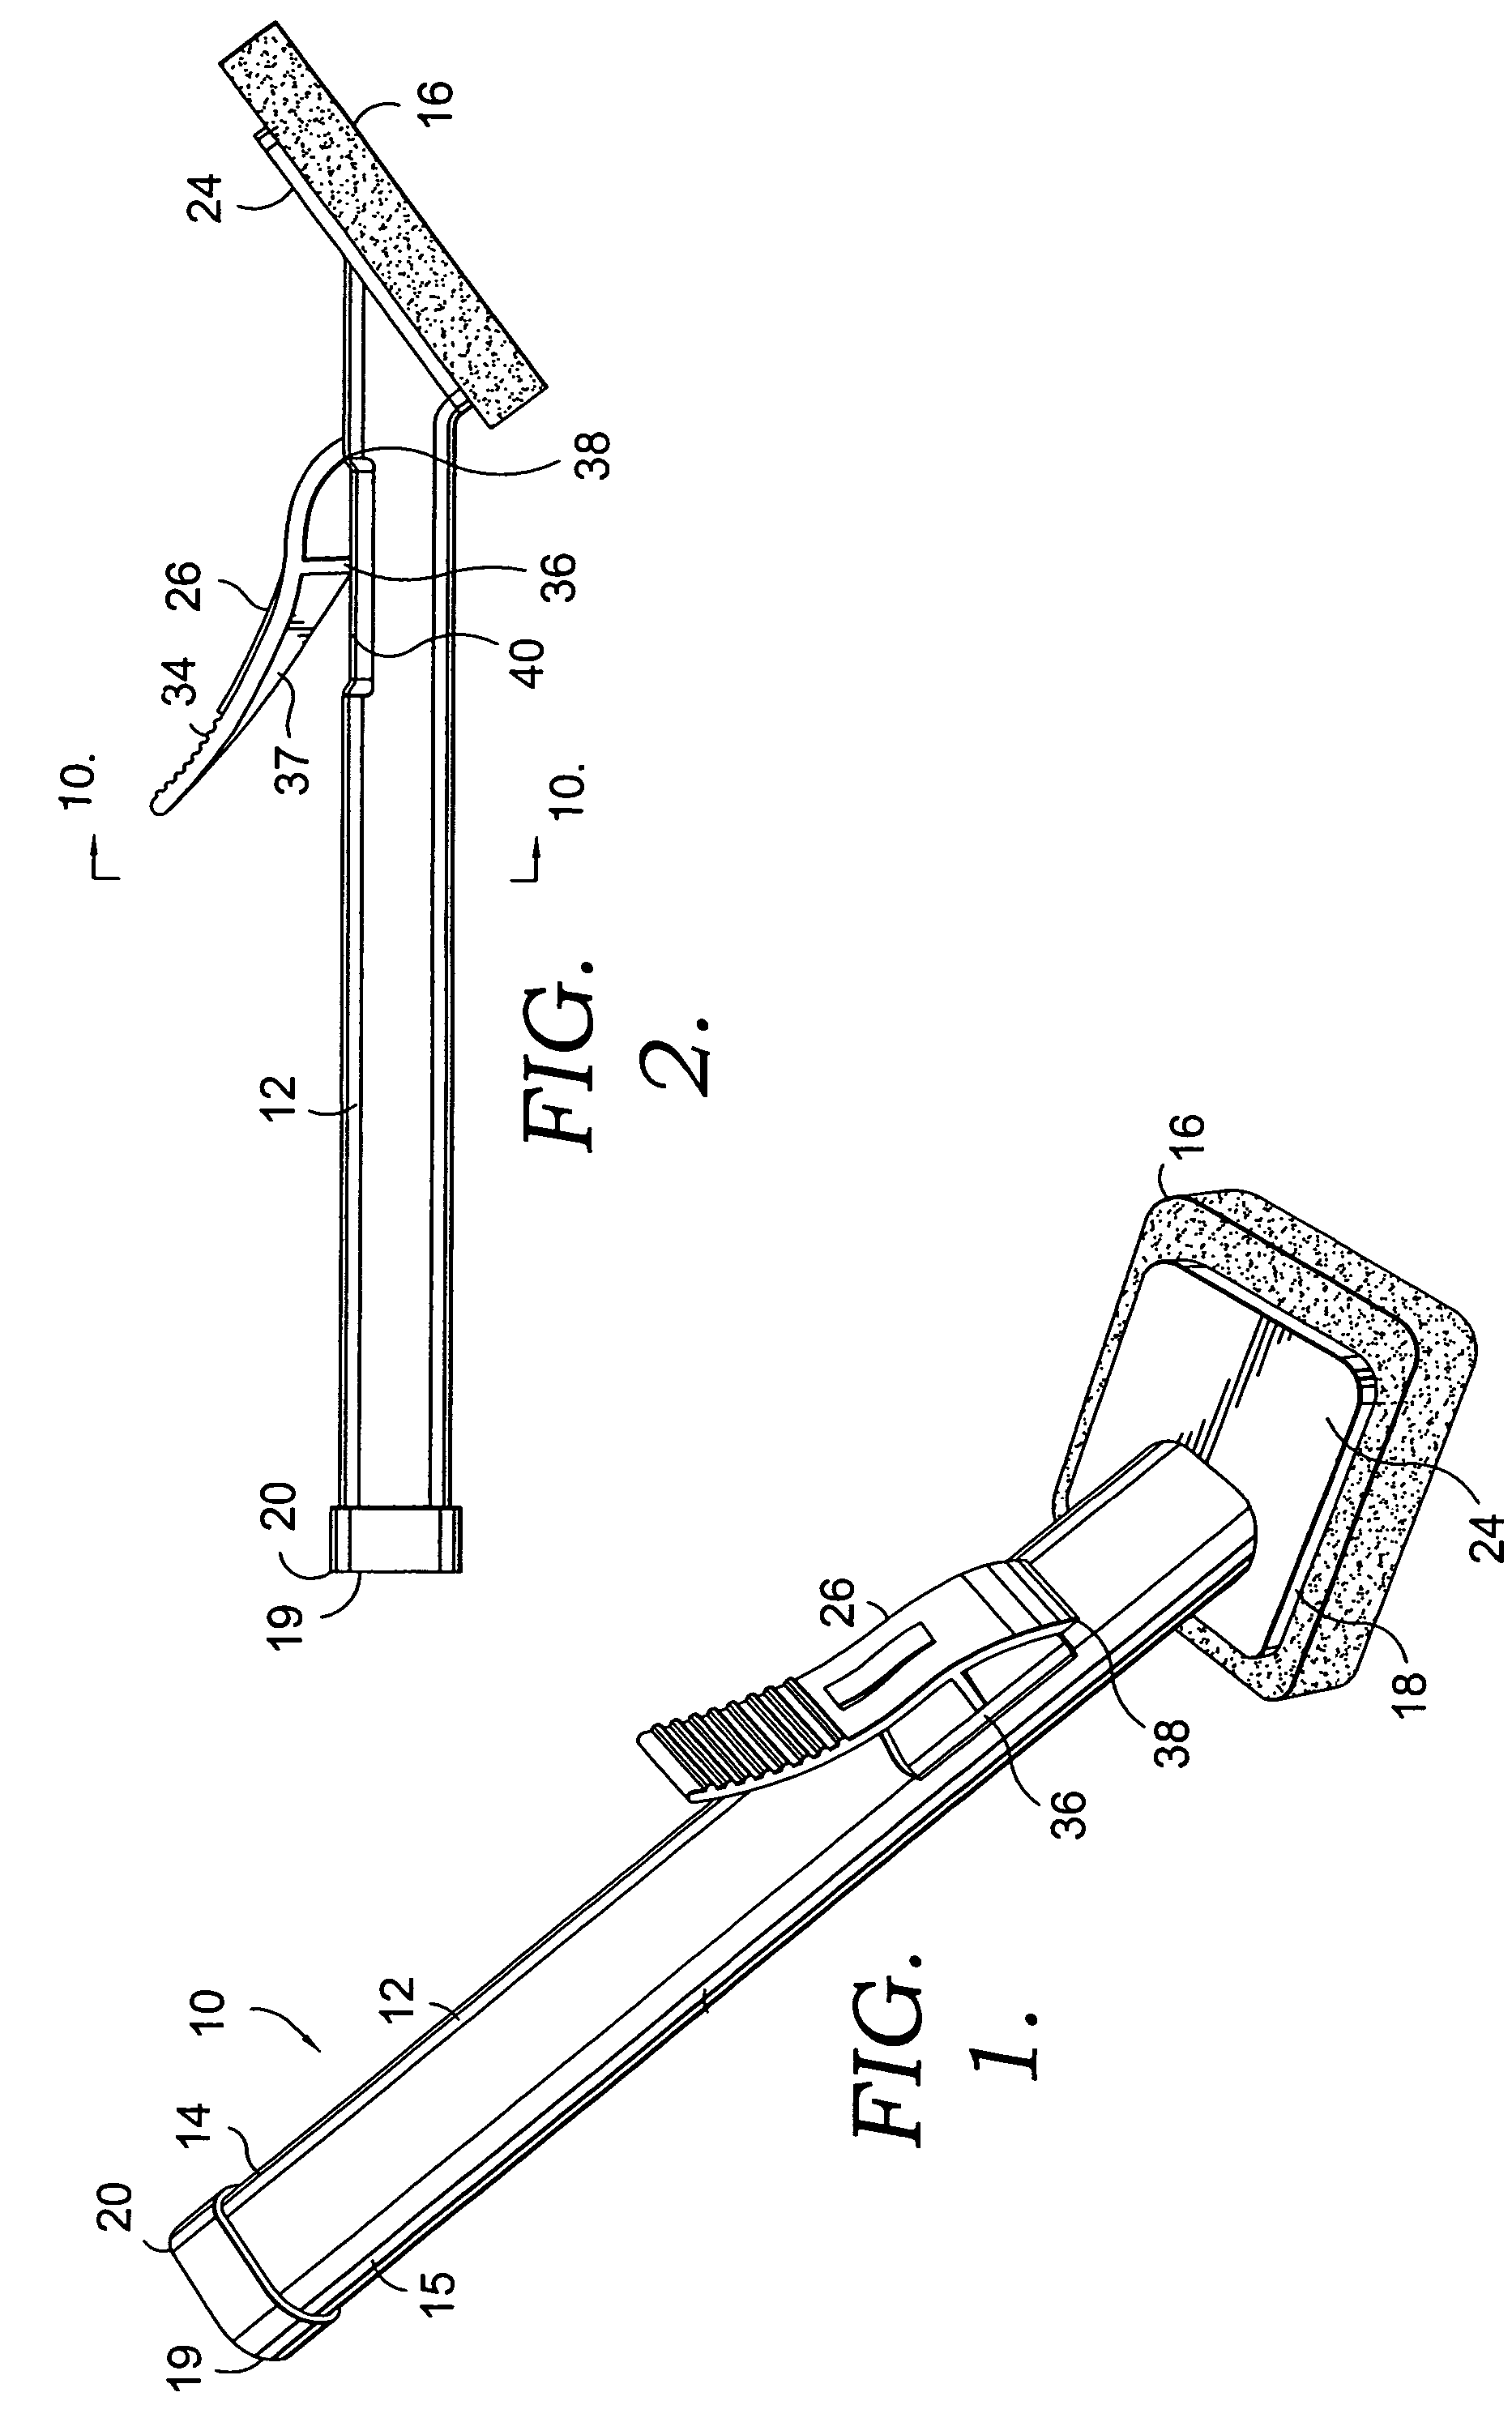 Liquid applicator with a mechanism for fracturing multiple ampoules